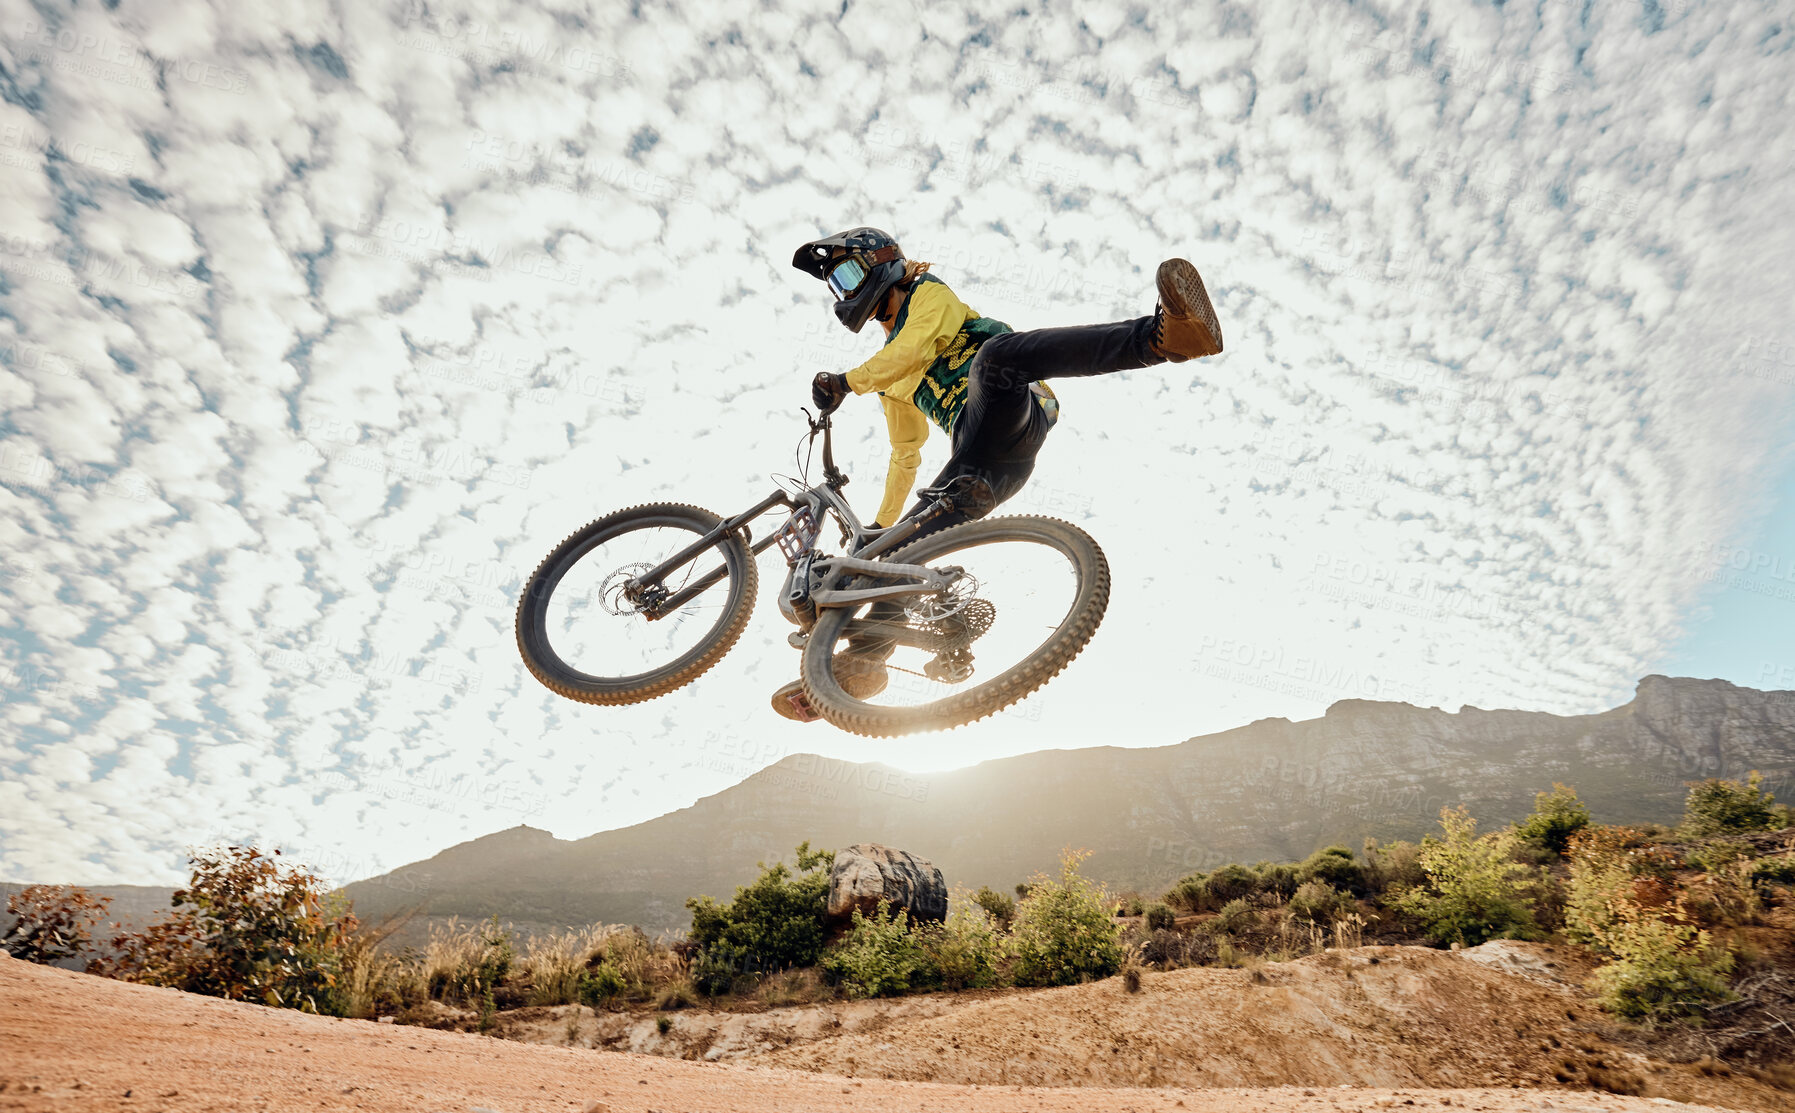 Buy stock photo Dessert, mountain bike and high jump trick for crazy fun competitive race, extreme sports performance and stunt freedom. Dirt biker flying in the air, adrenaline sport risk and awesome adventure ride